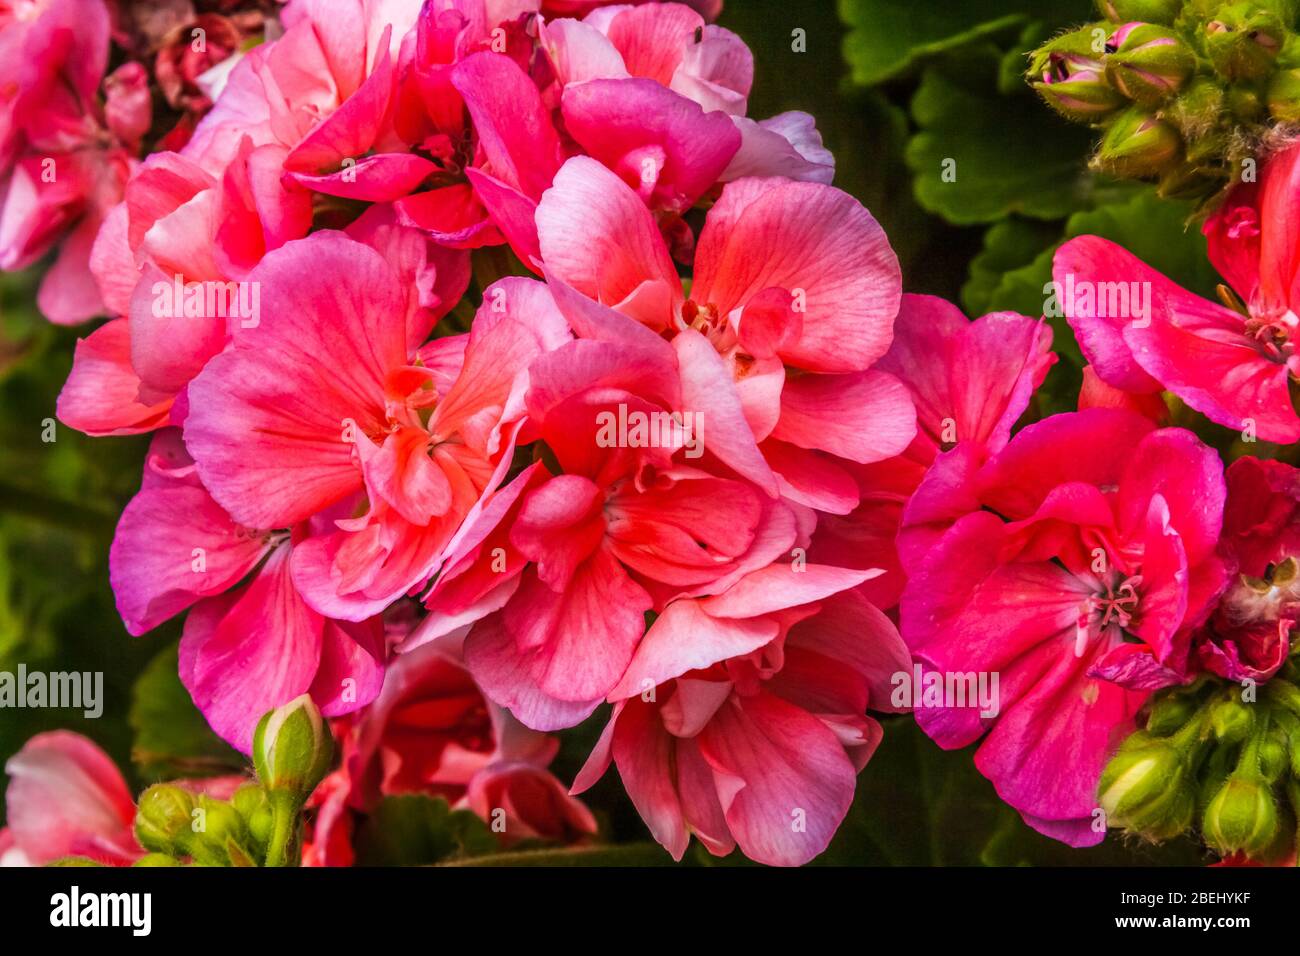 Close up of Pelargonium lara starshine, a flowering plant which includes about 200 species of perennials, succulents, and shrubs, Stock Photo